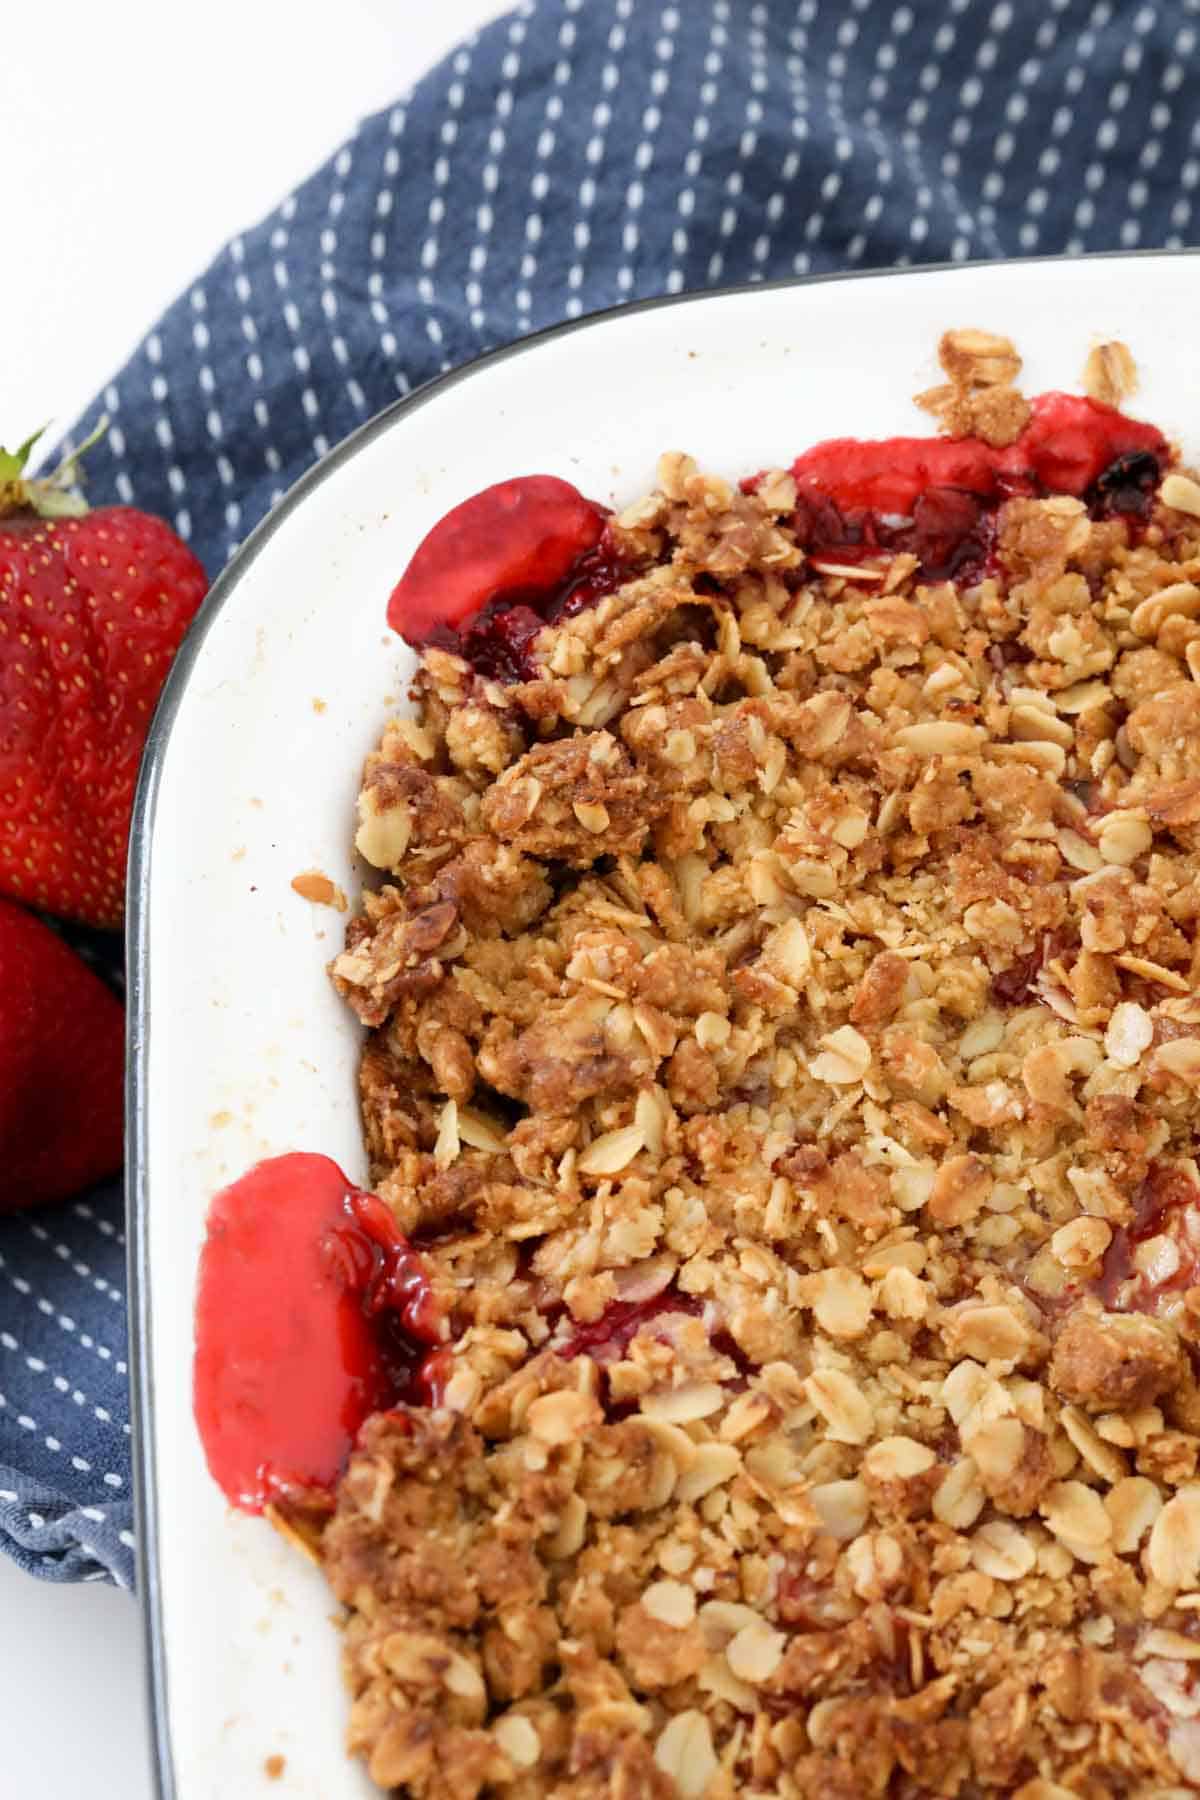 Rolled oat crunchy topping over a dessert in a white baking dish.